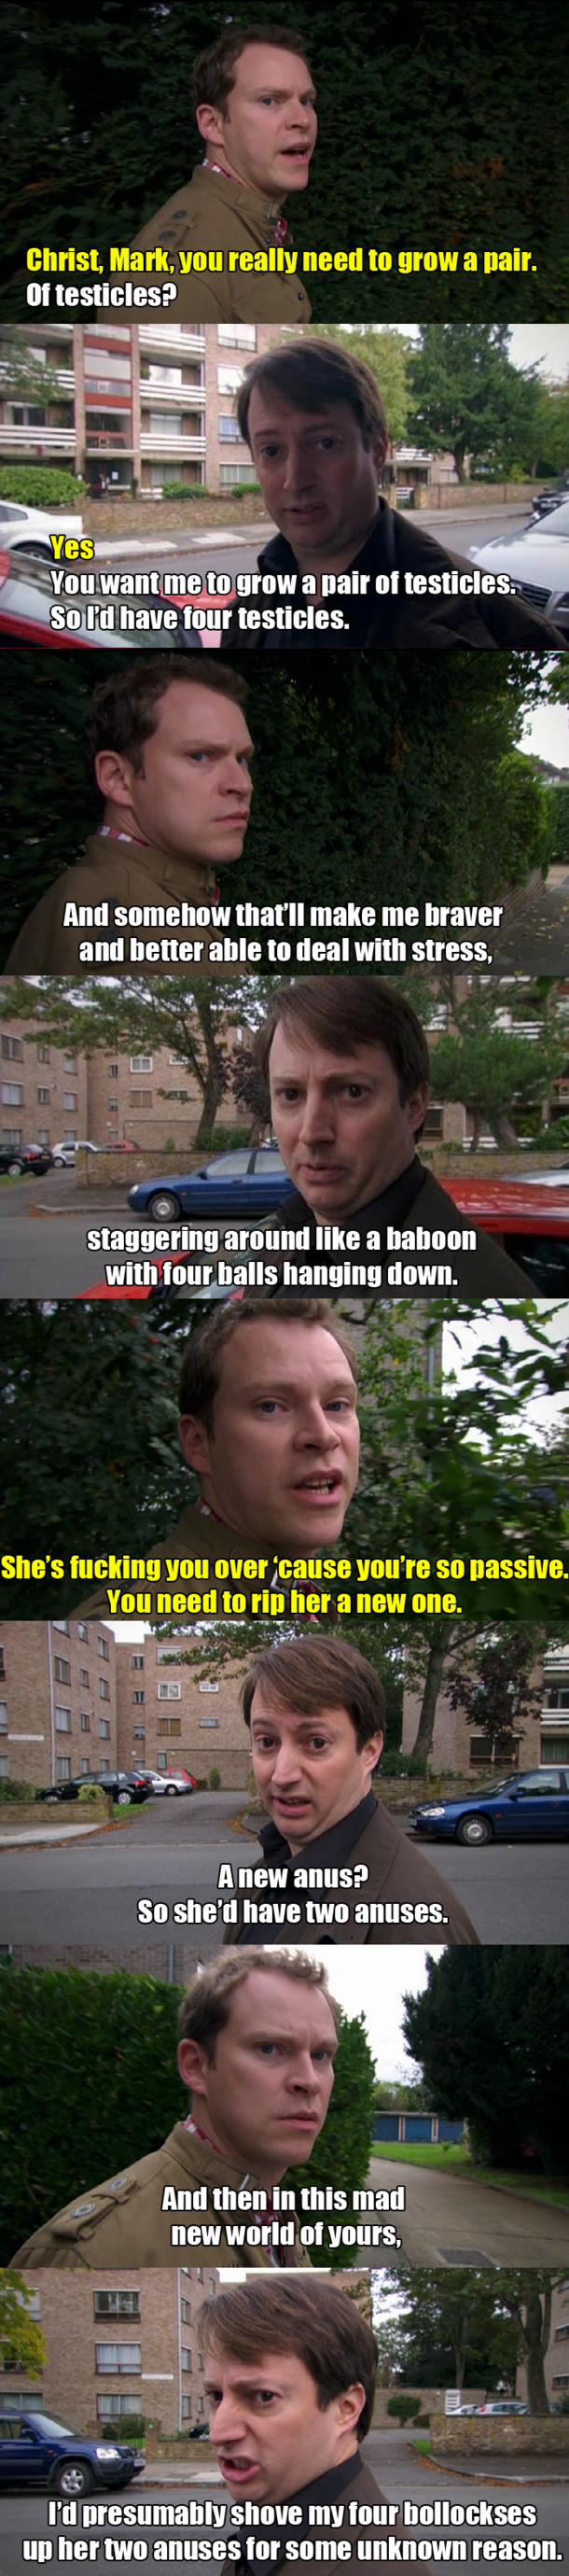 One of the best Peep Show moments